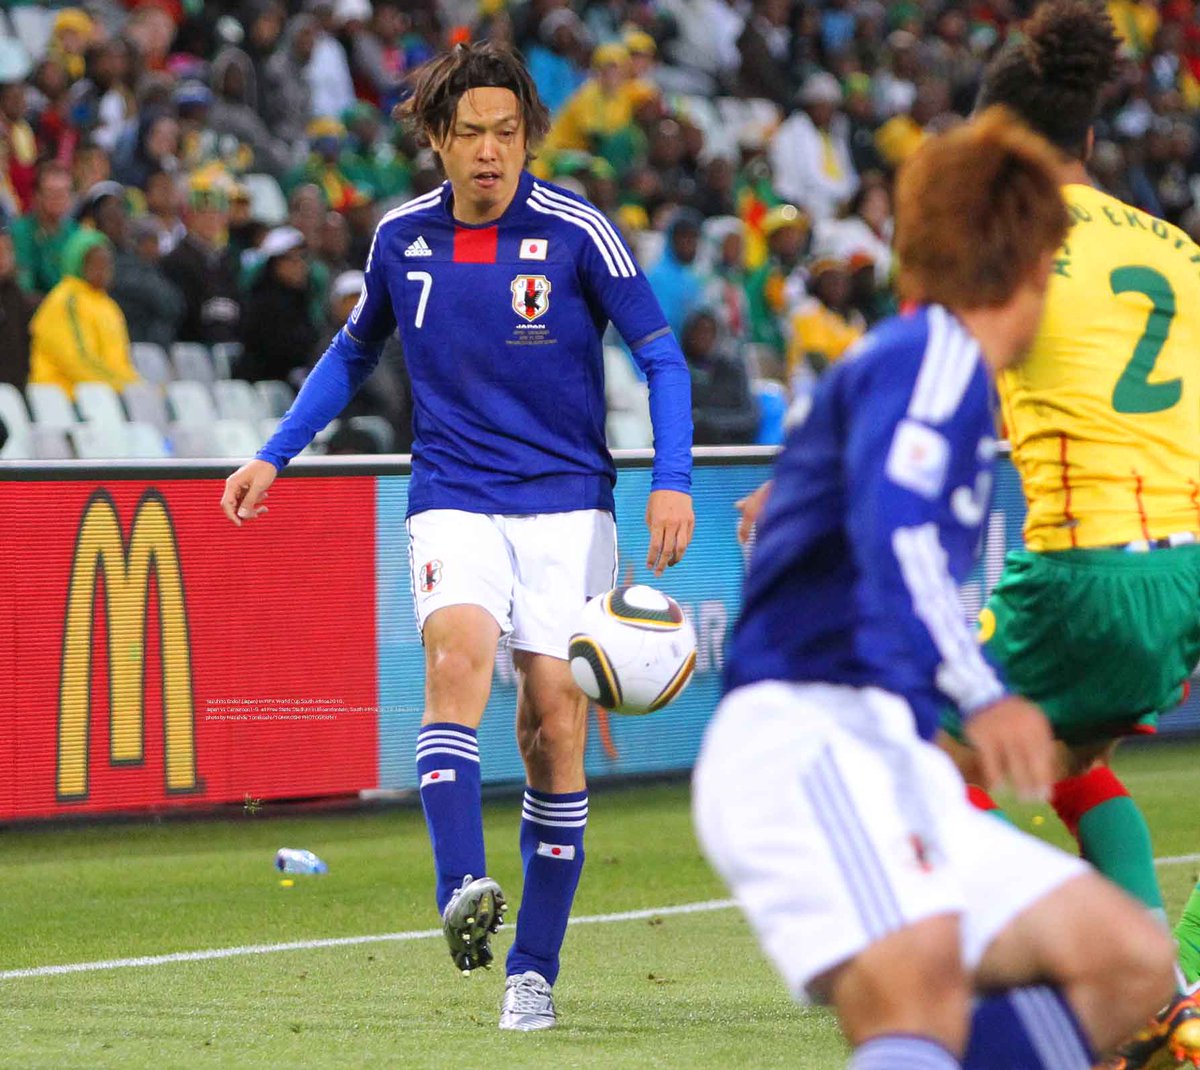 Tphoto 遠藤保仁７ 日本代表 10ワールドカップ南アフリカ Yasuhito Endo7 Japan In Fifa World Cup South Africa10 Japan Vs Cameroon1 0 At Free State Stadium In Bloemfontein Thomsoutherland Africa On 14 June 10 Photo By Masahde